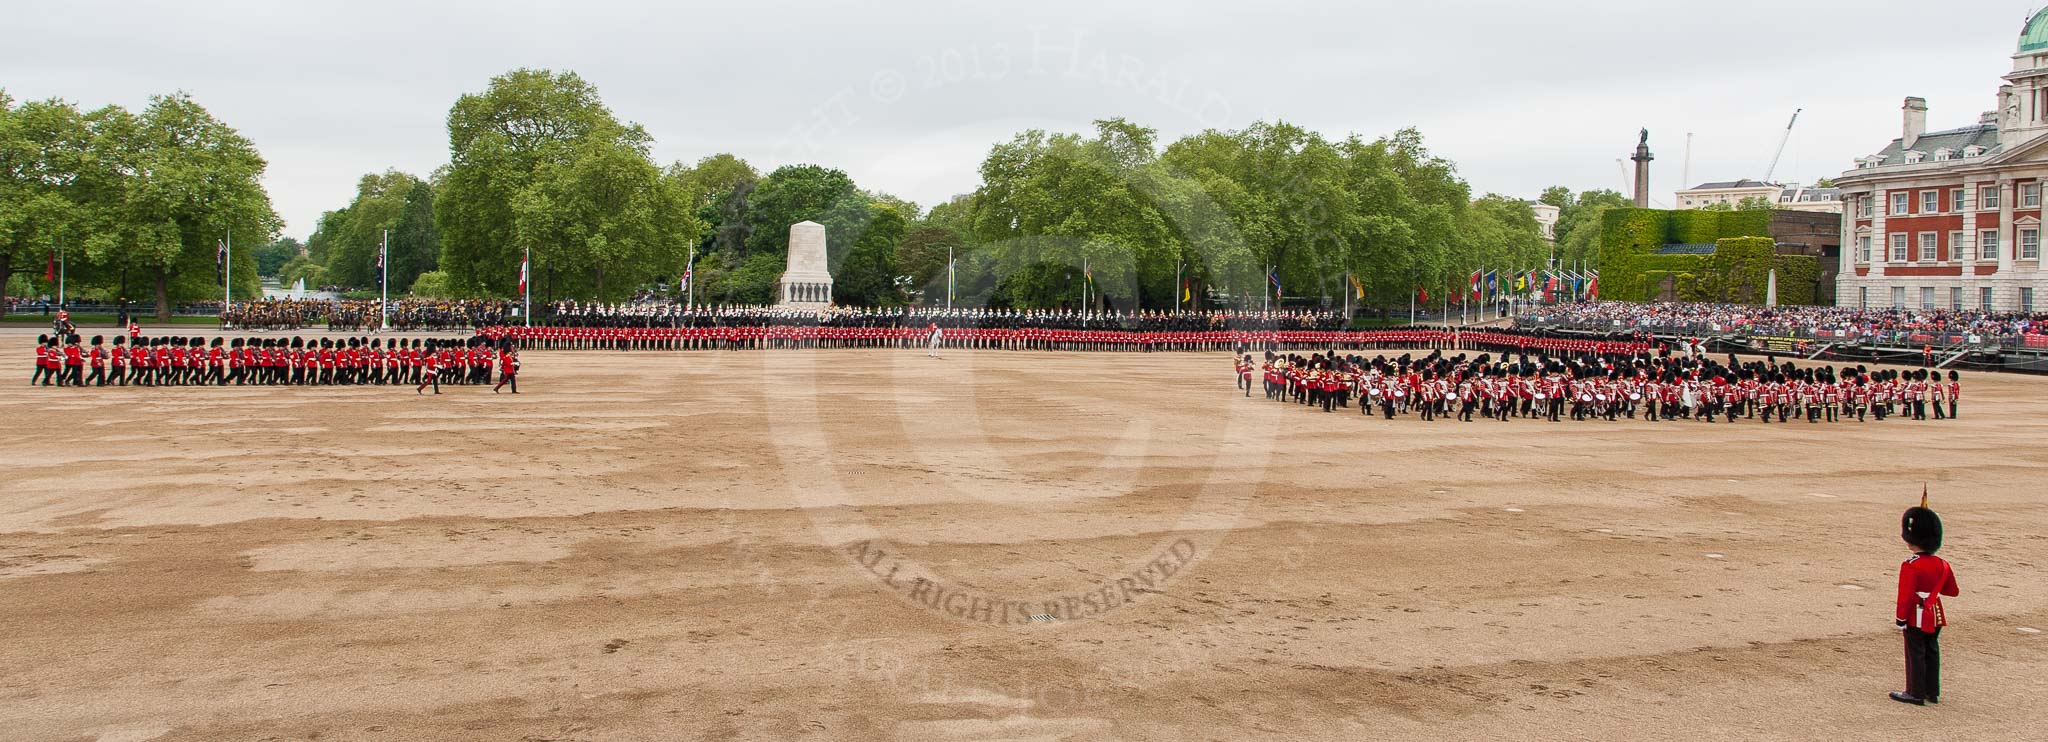 Major General's Review 2013: A wide angle overview of Horse Guards Parade. on the left, No. 1 Guard (Escort for the Colour),1st Battalion Welsh Guards is moving forward to receive the Colour..
Horse Guards Parade, Westminster,
London SW1,

United Kingdom,
on 01 June 2013 at 11:16, image #373